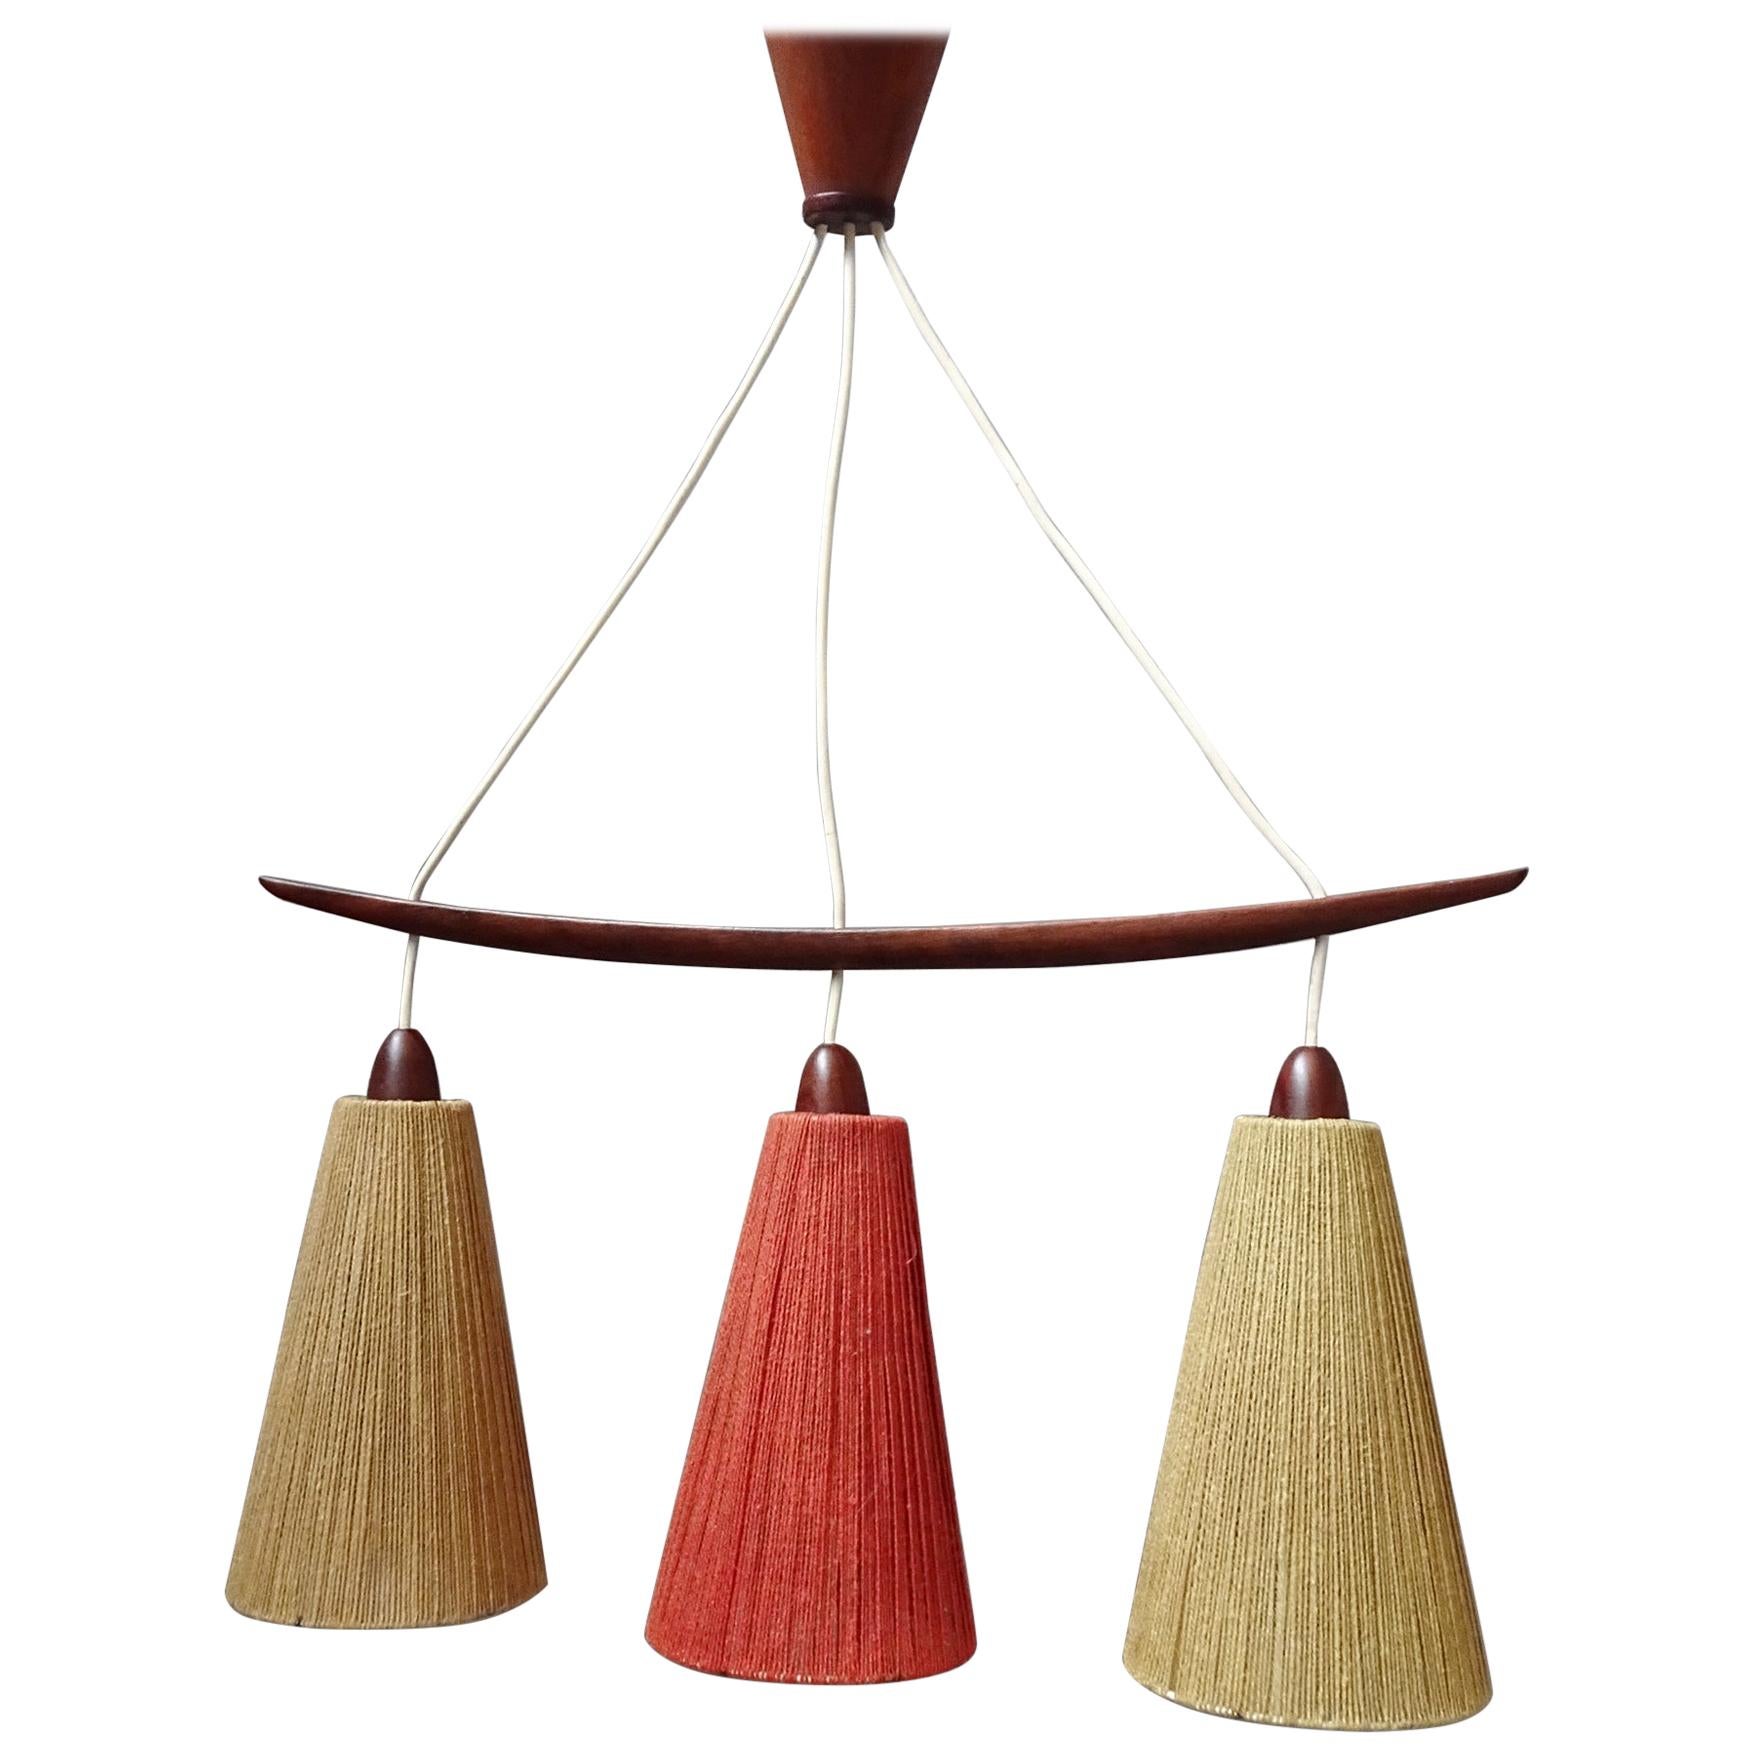 Midcentury Teak and Cord Shade Chandelier by Temde, Germany, 1960 For Sale